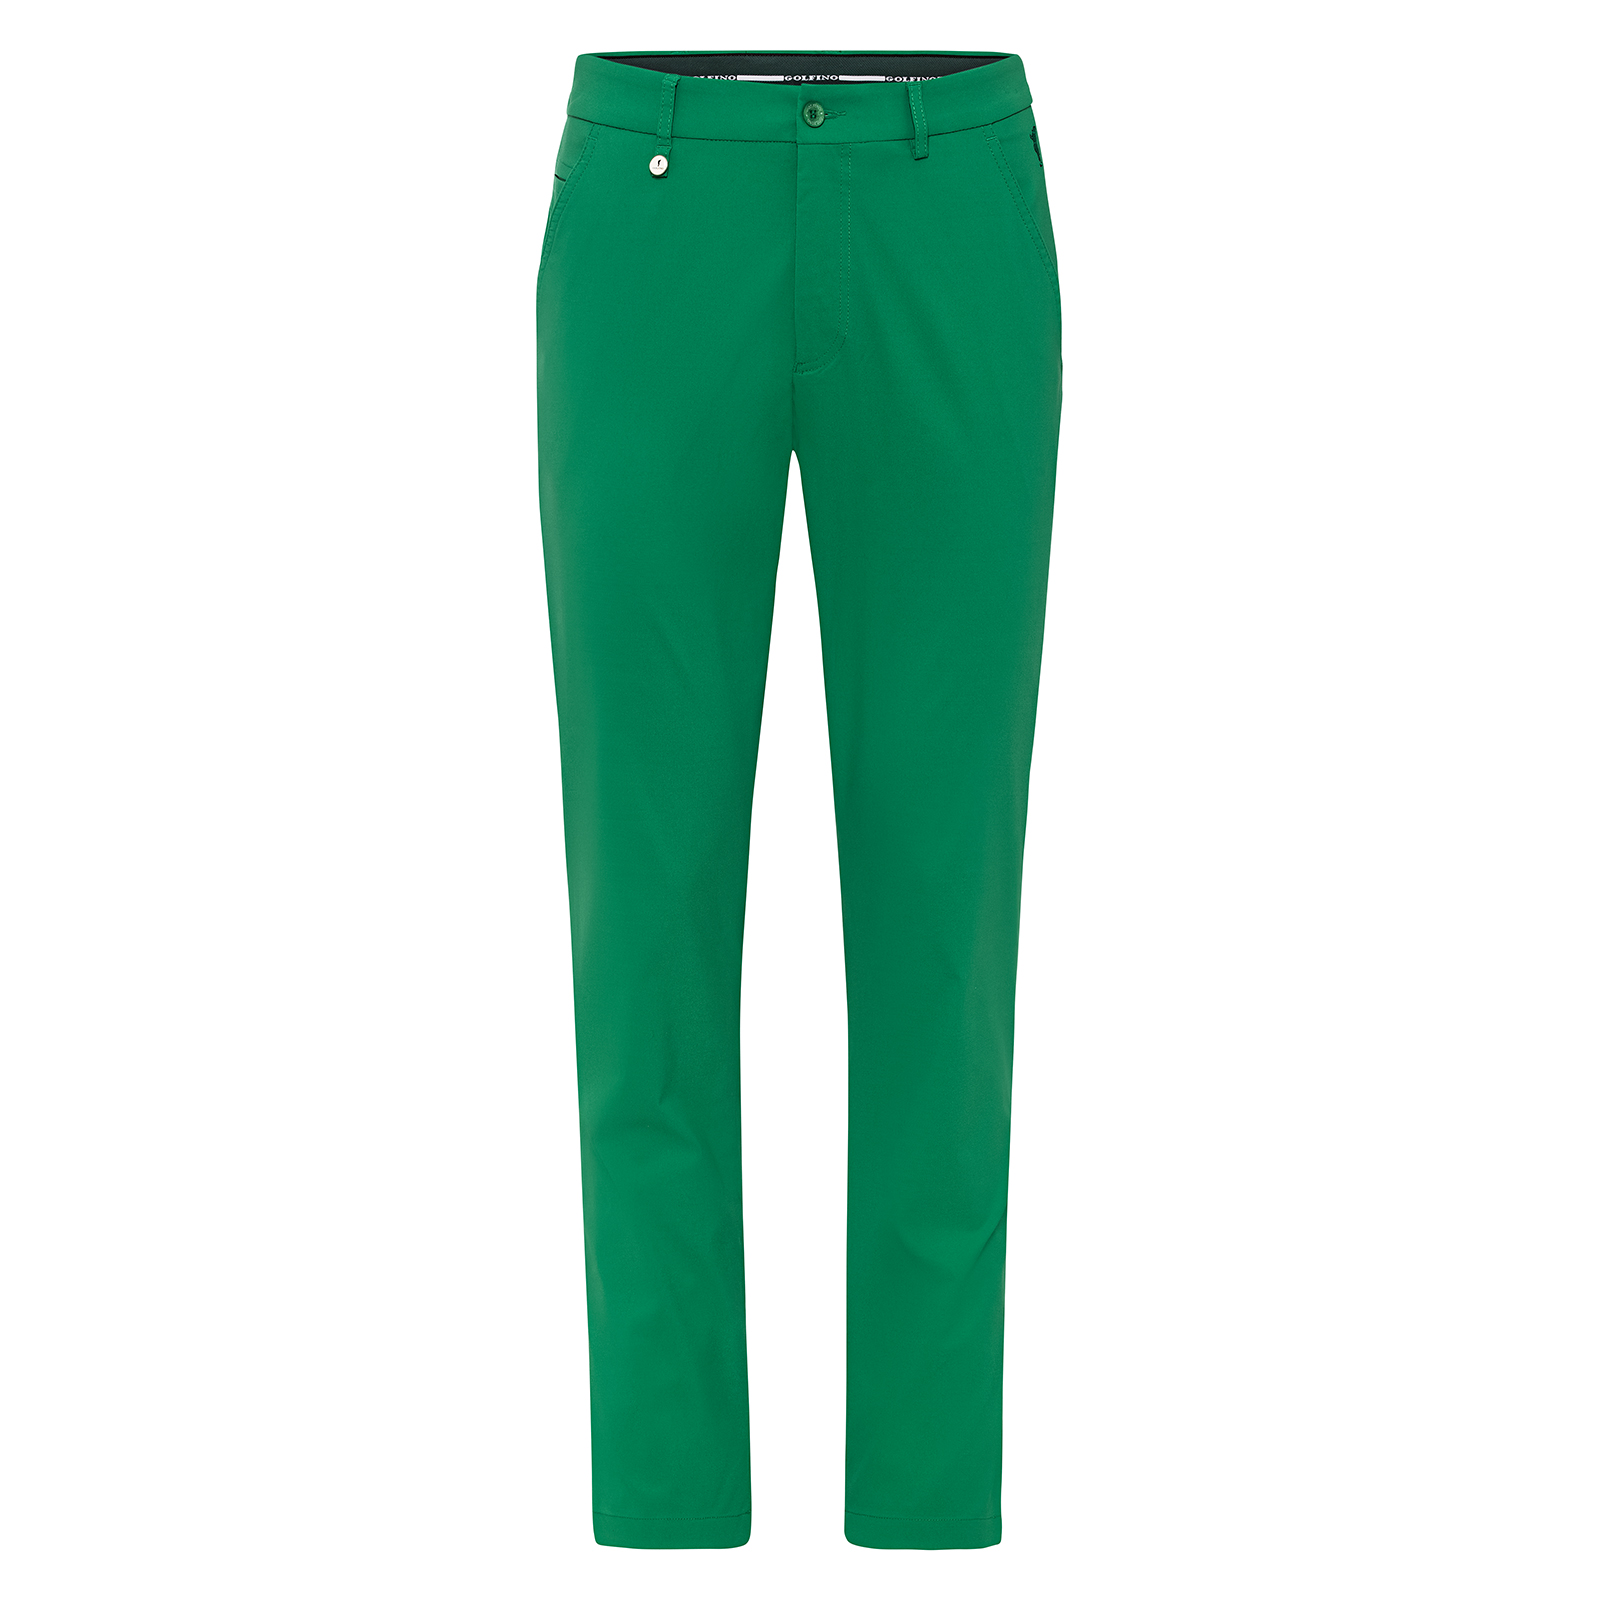 Men's golf trousers with stretch component